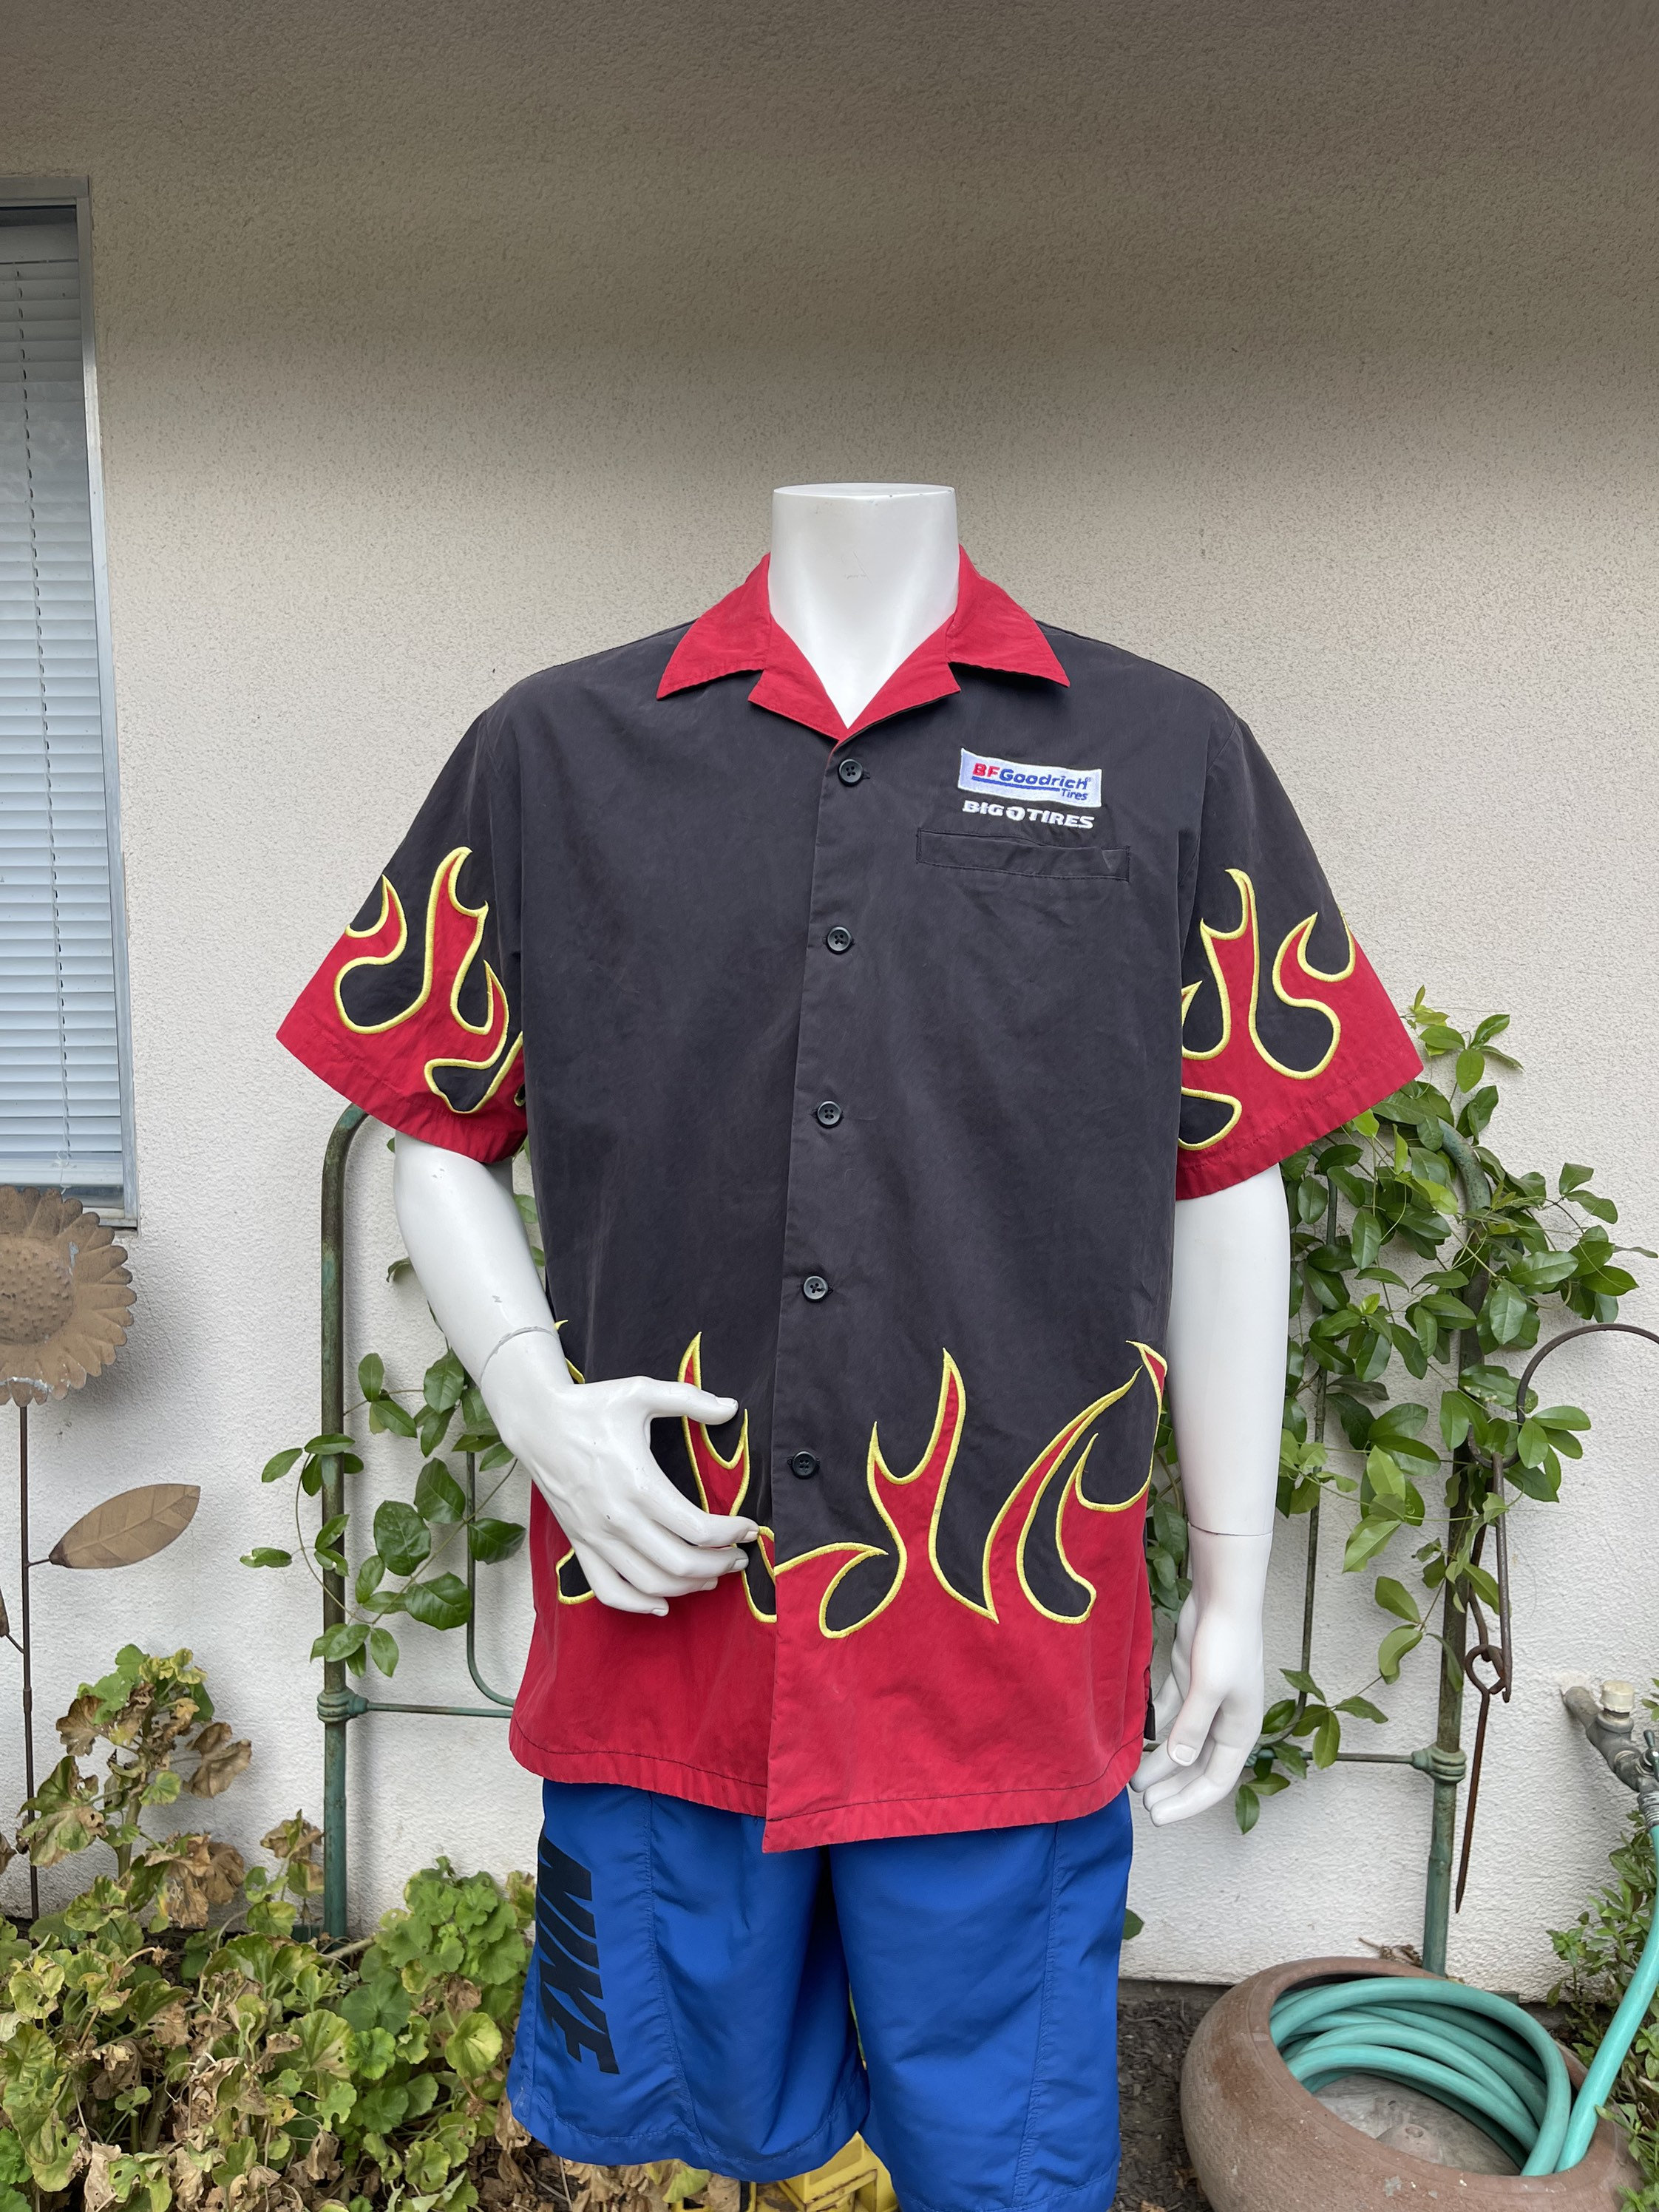 Personalized Flame Bowling Shirt for Men Bowling Shirts Short Sleeve F -  Gearcape